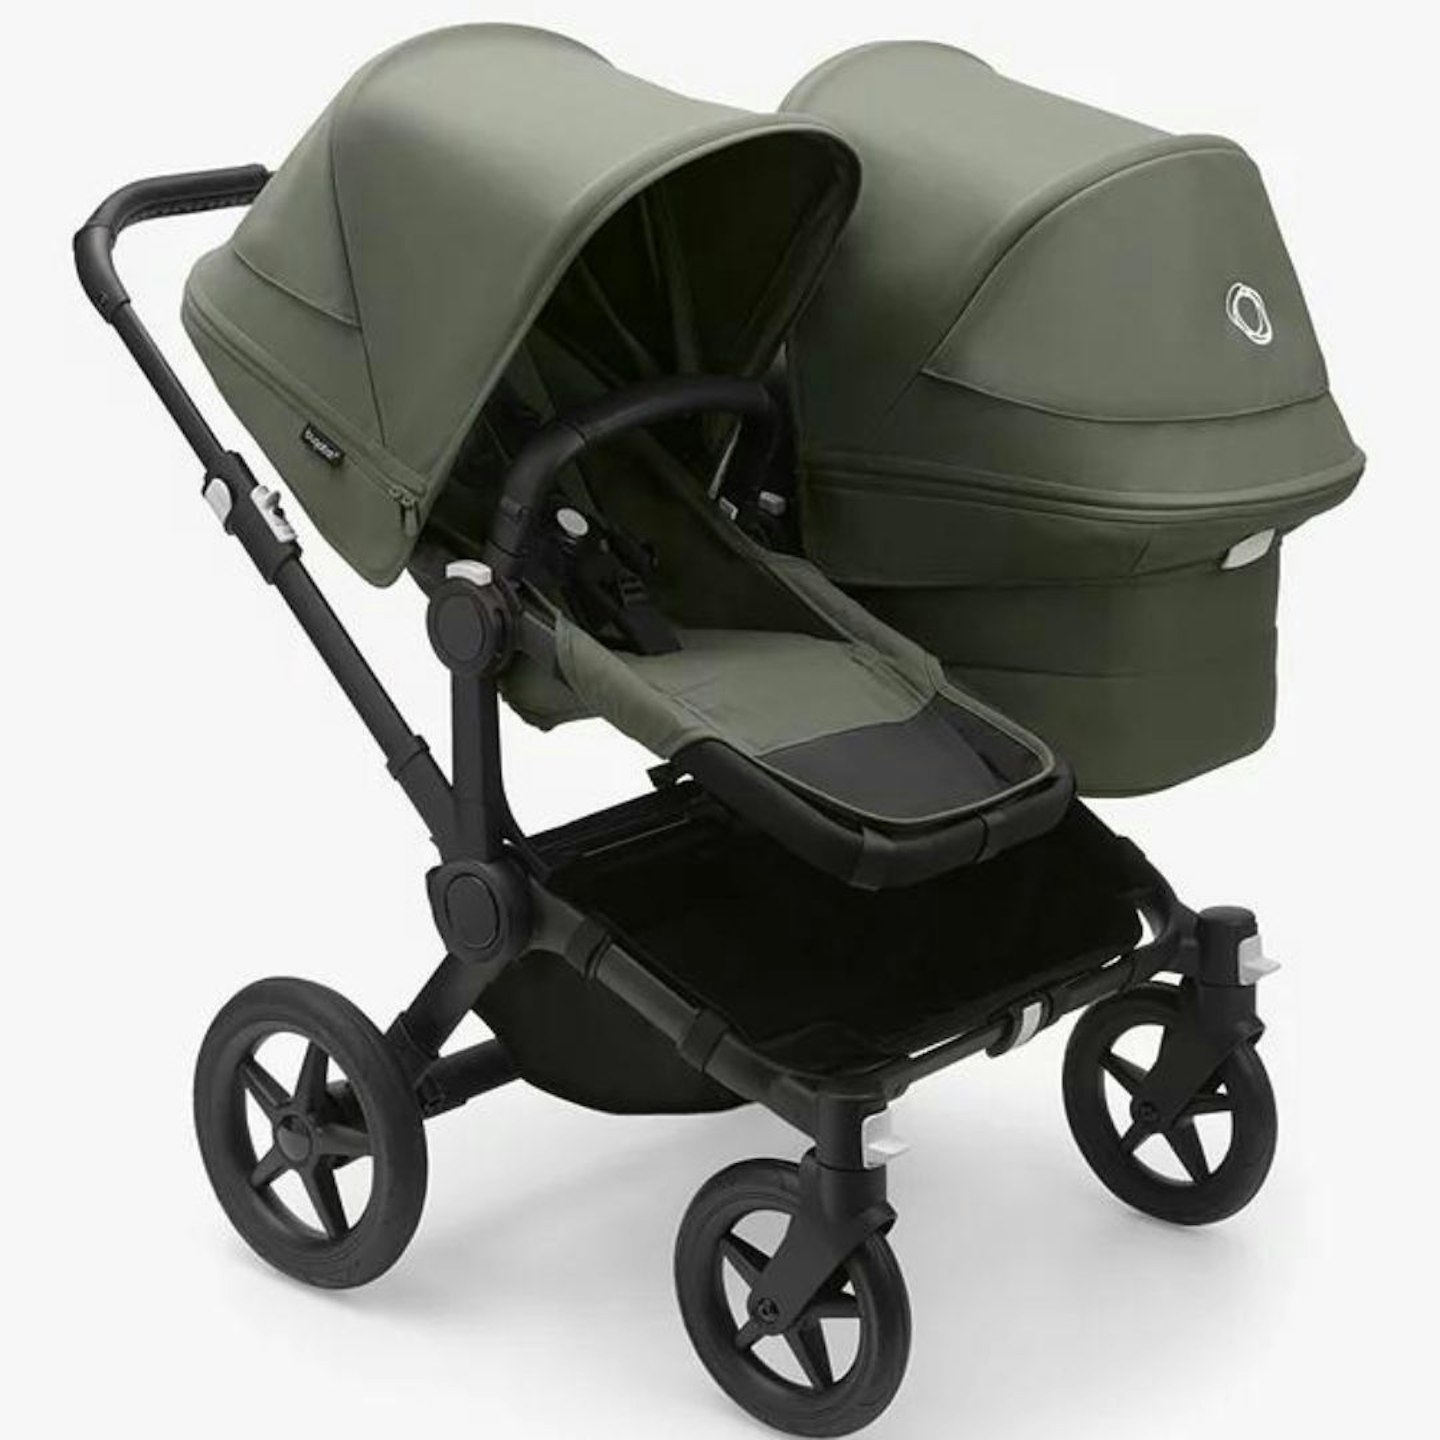 Best Double Prams: Bugaboo Donkey 5 Duo Pushchair & Carrycot